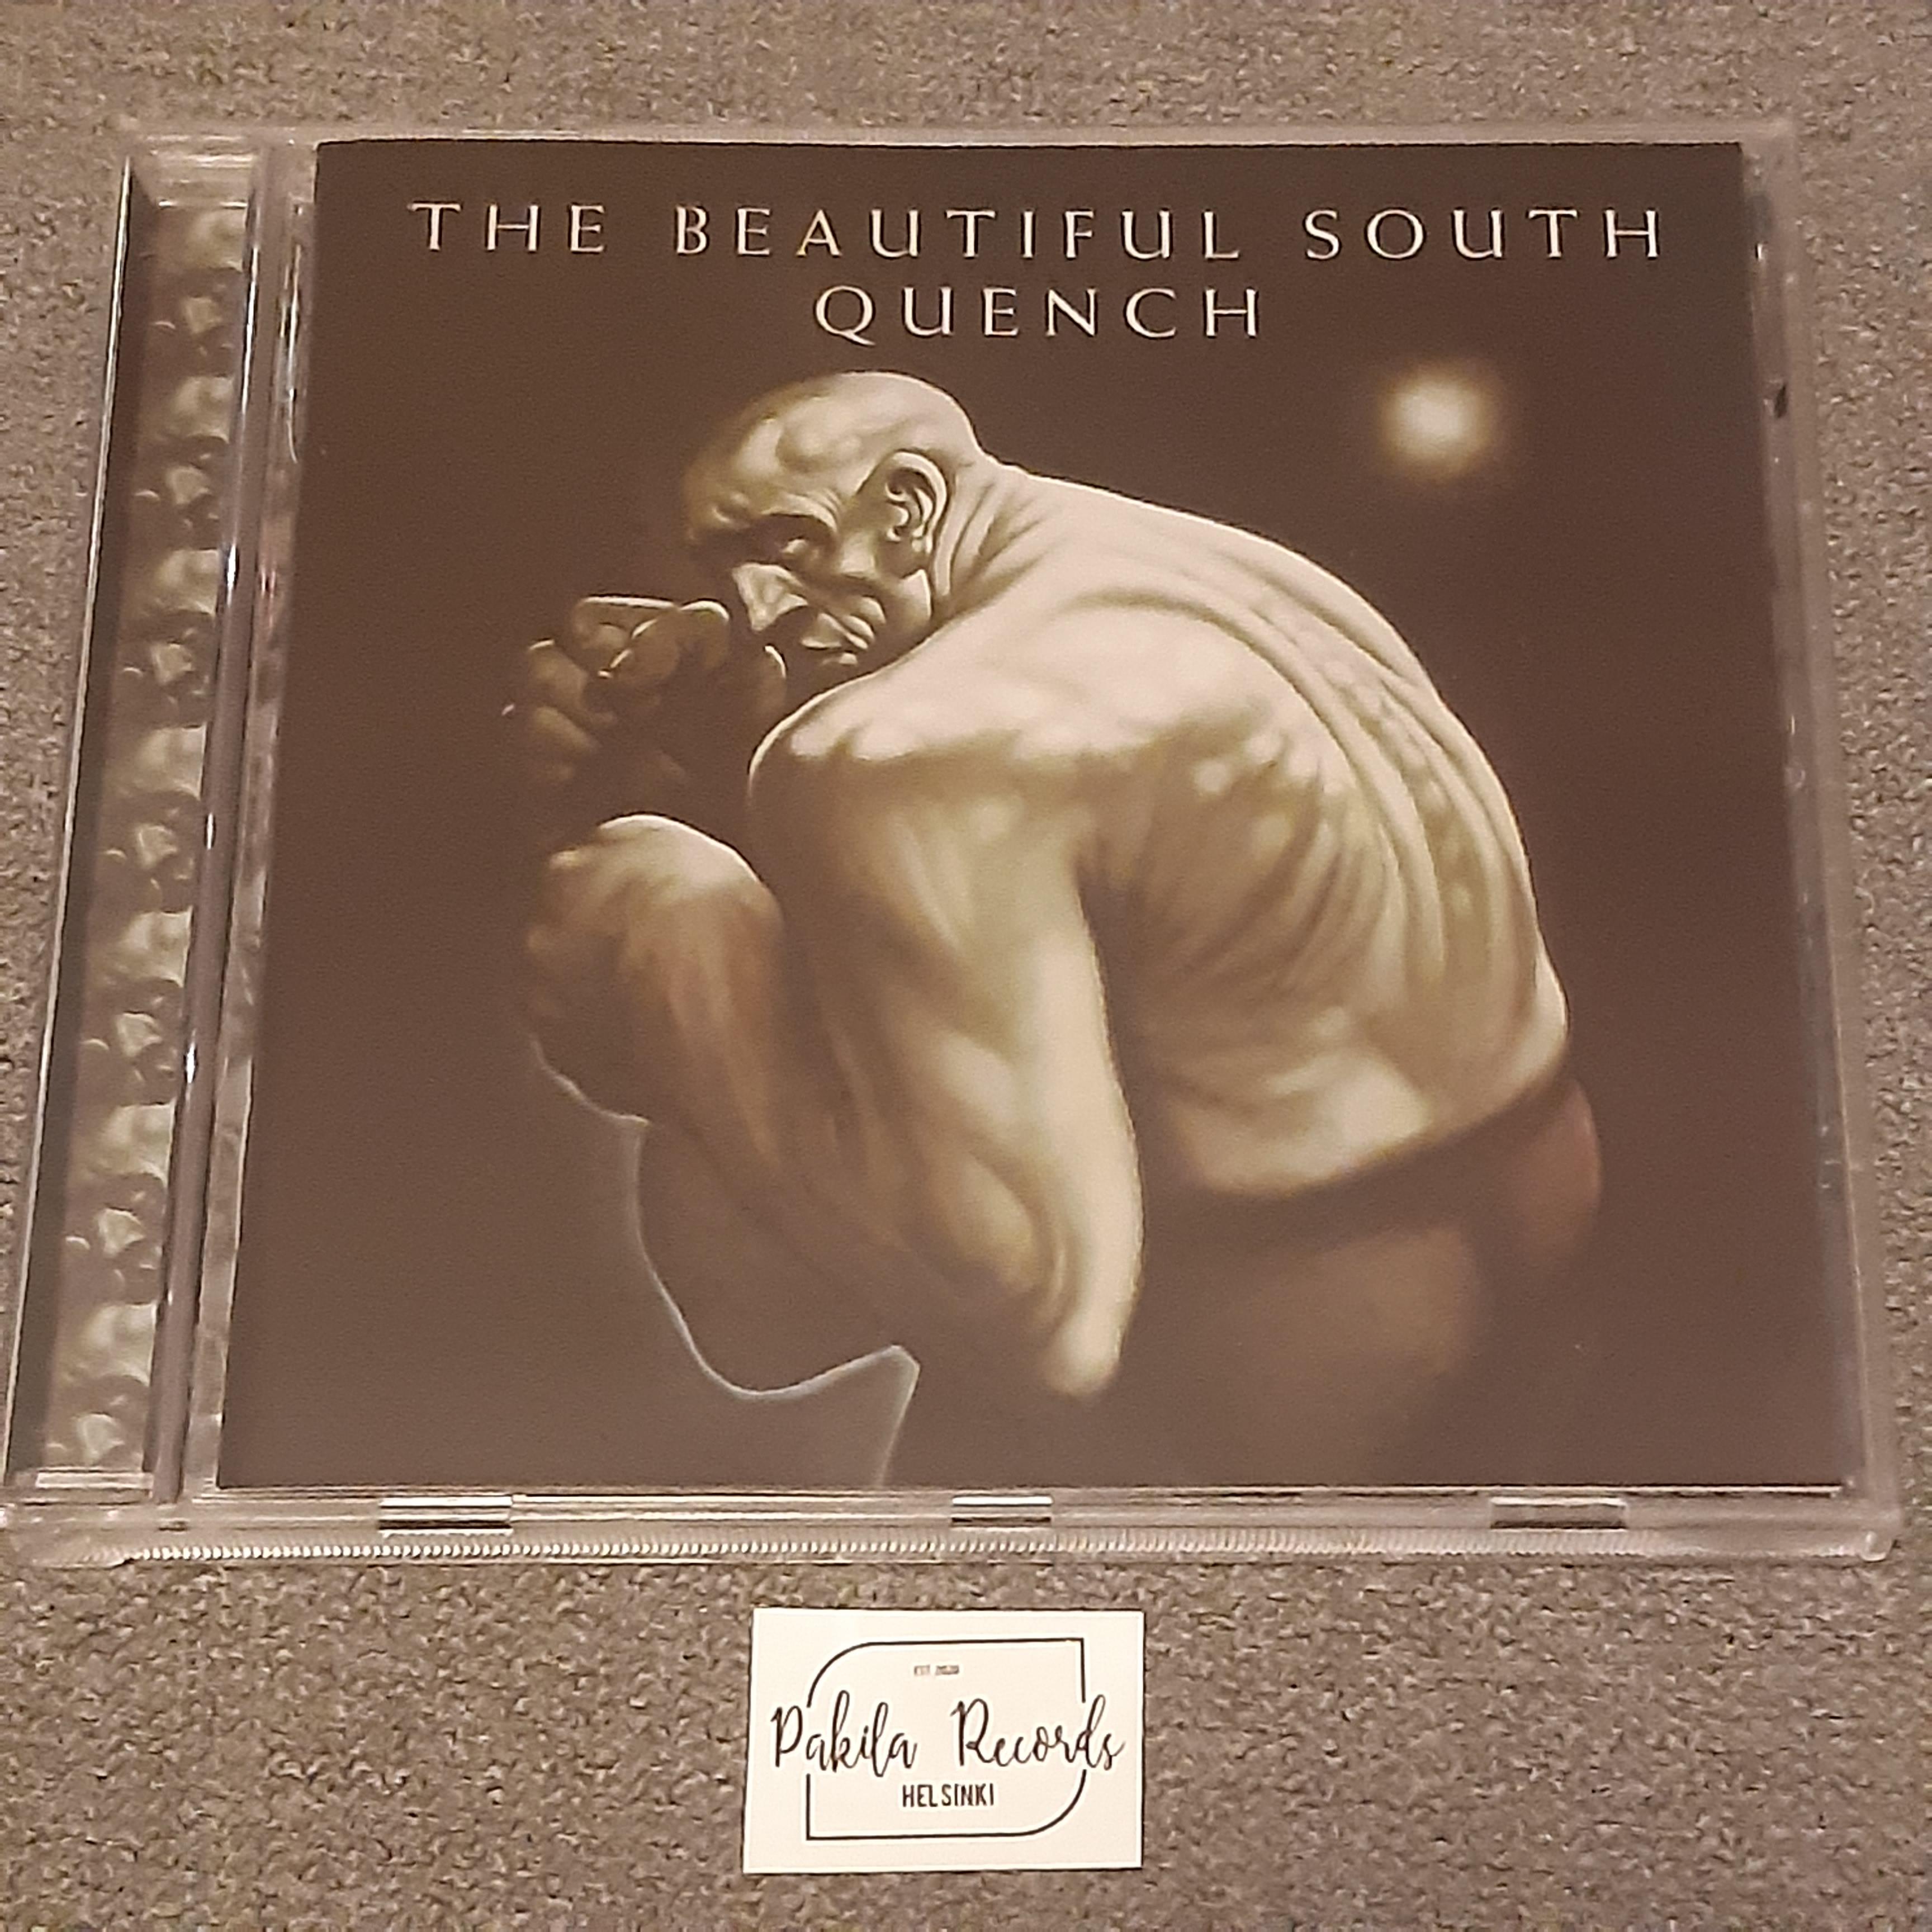 The Beautiful South - Quench - CD (käytetty)